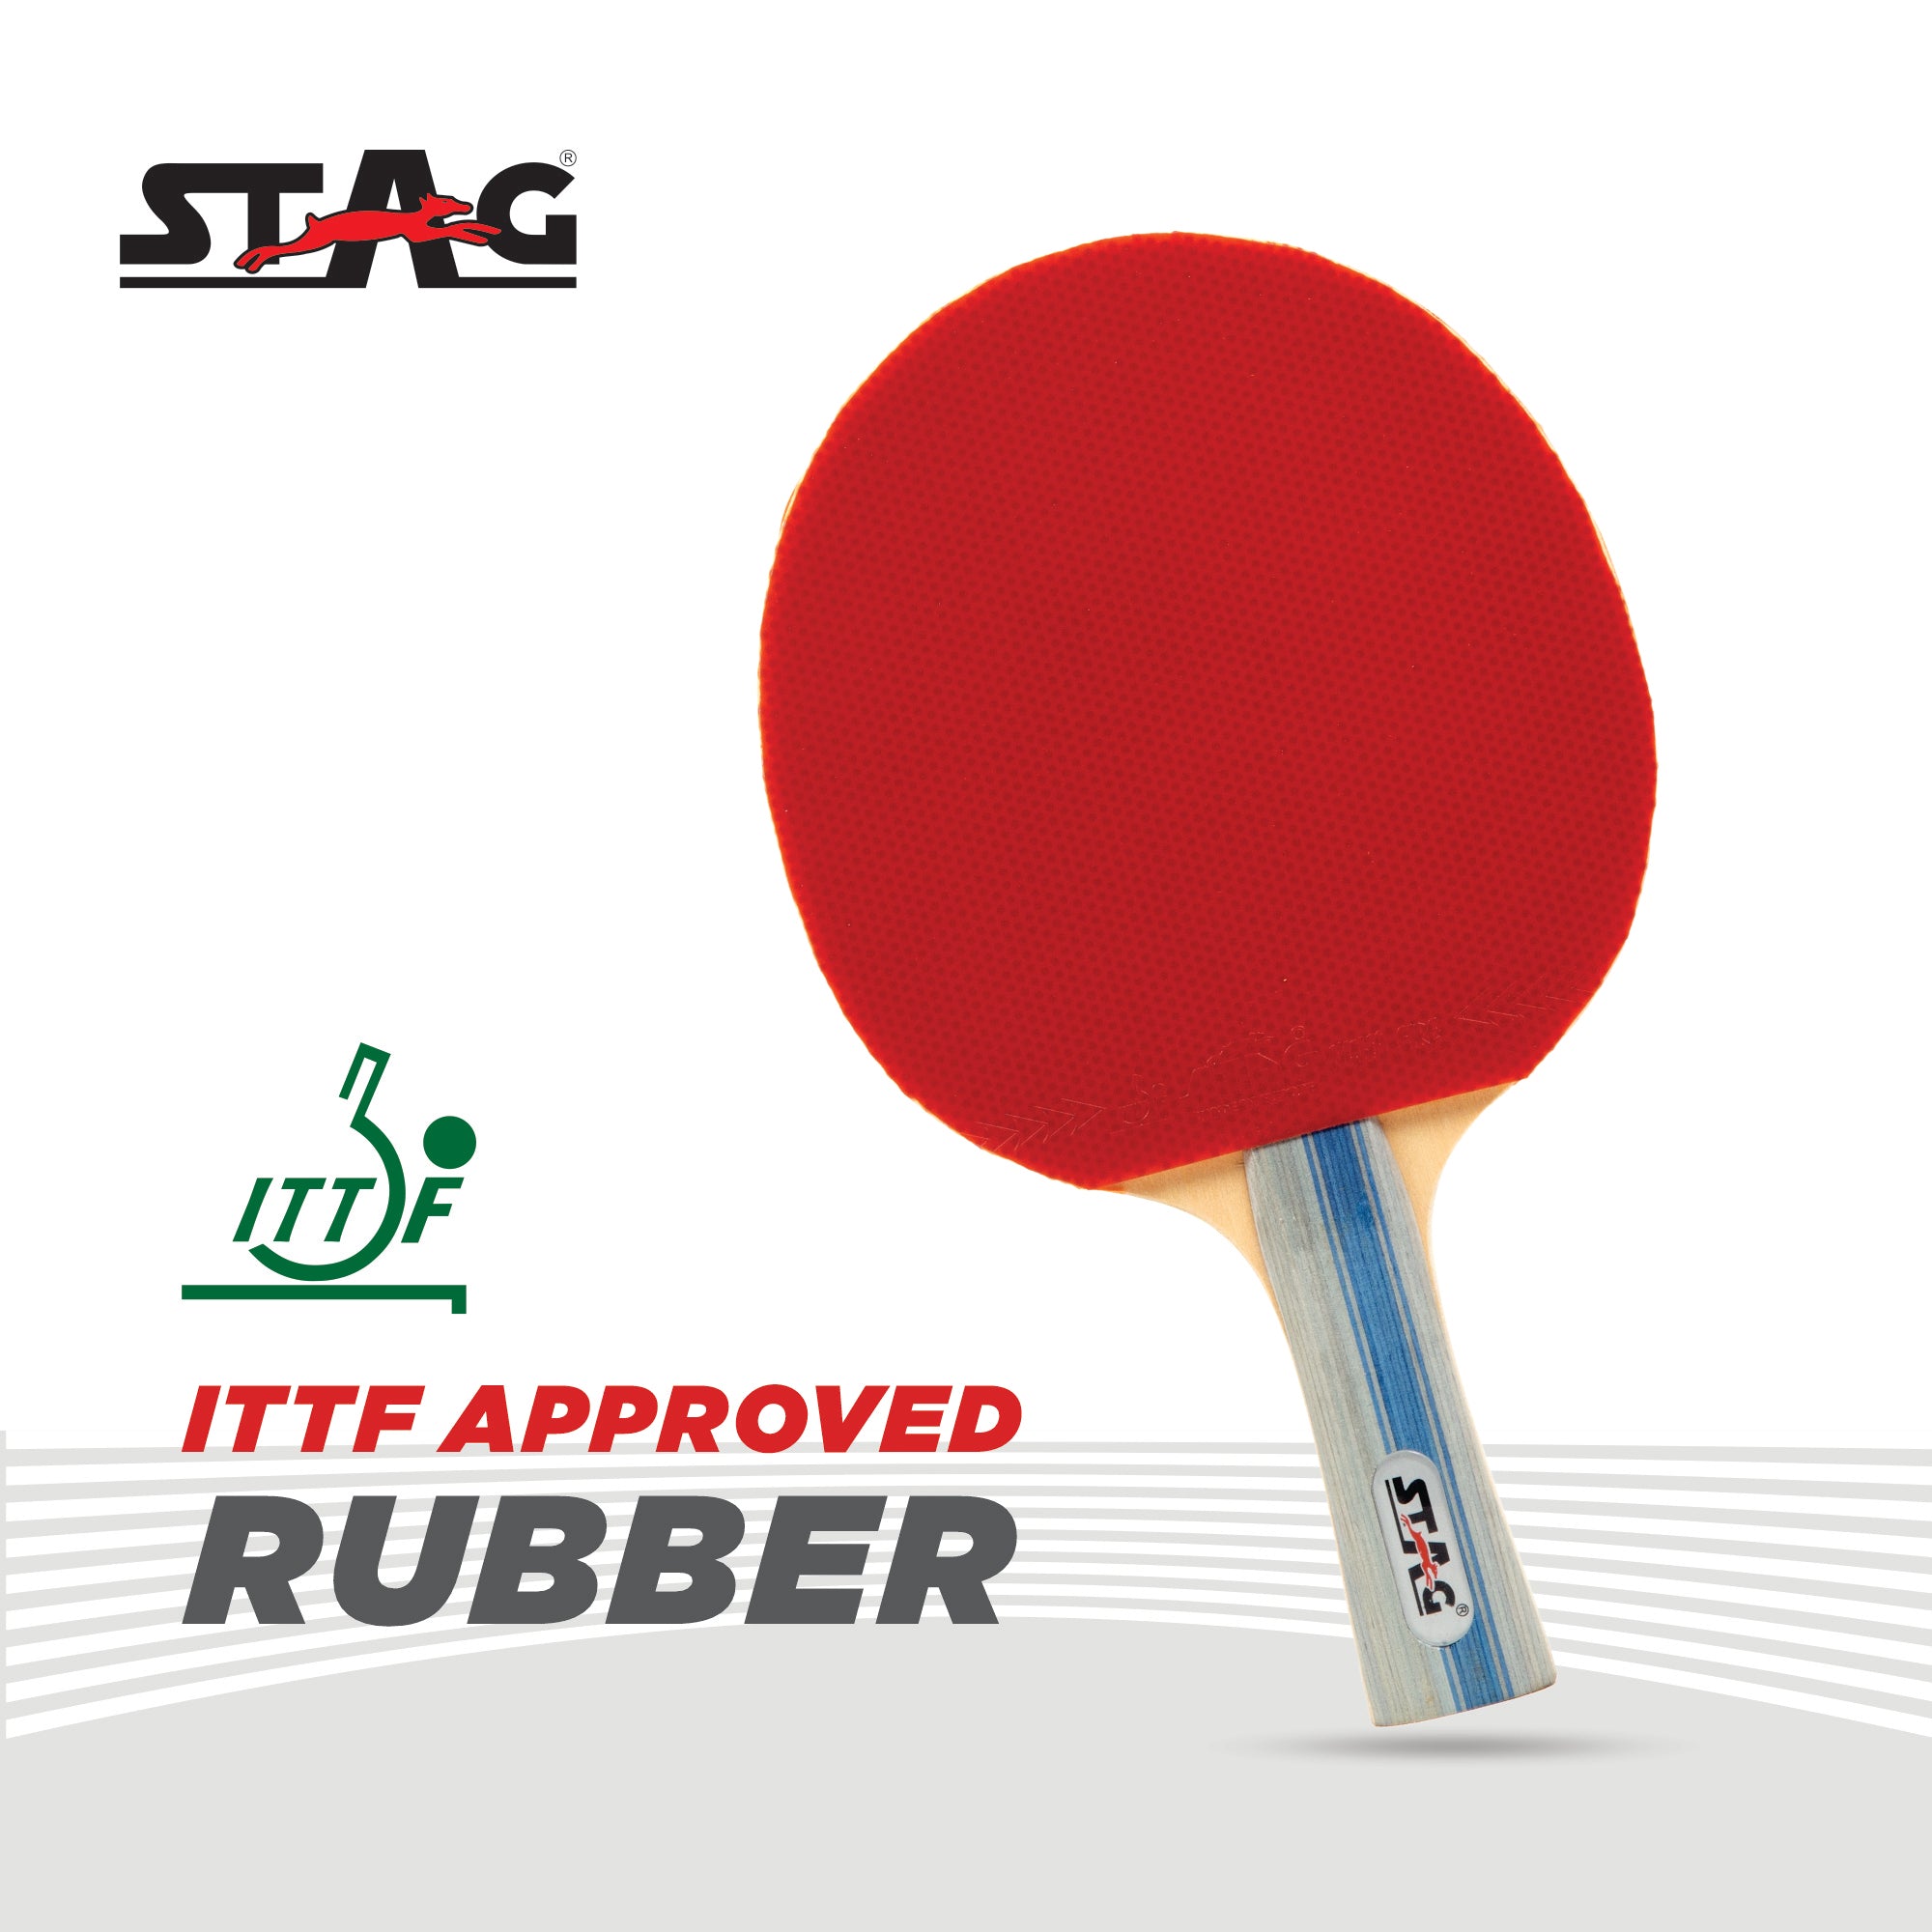 STAG Tec Ninja Table Tennis Racquet Advanced, ITTF Approved Rubber (Multicolor, 160 grams)